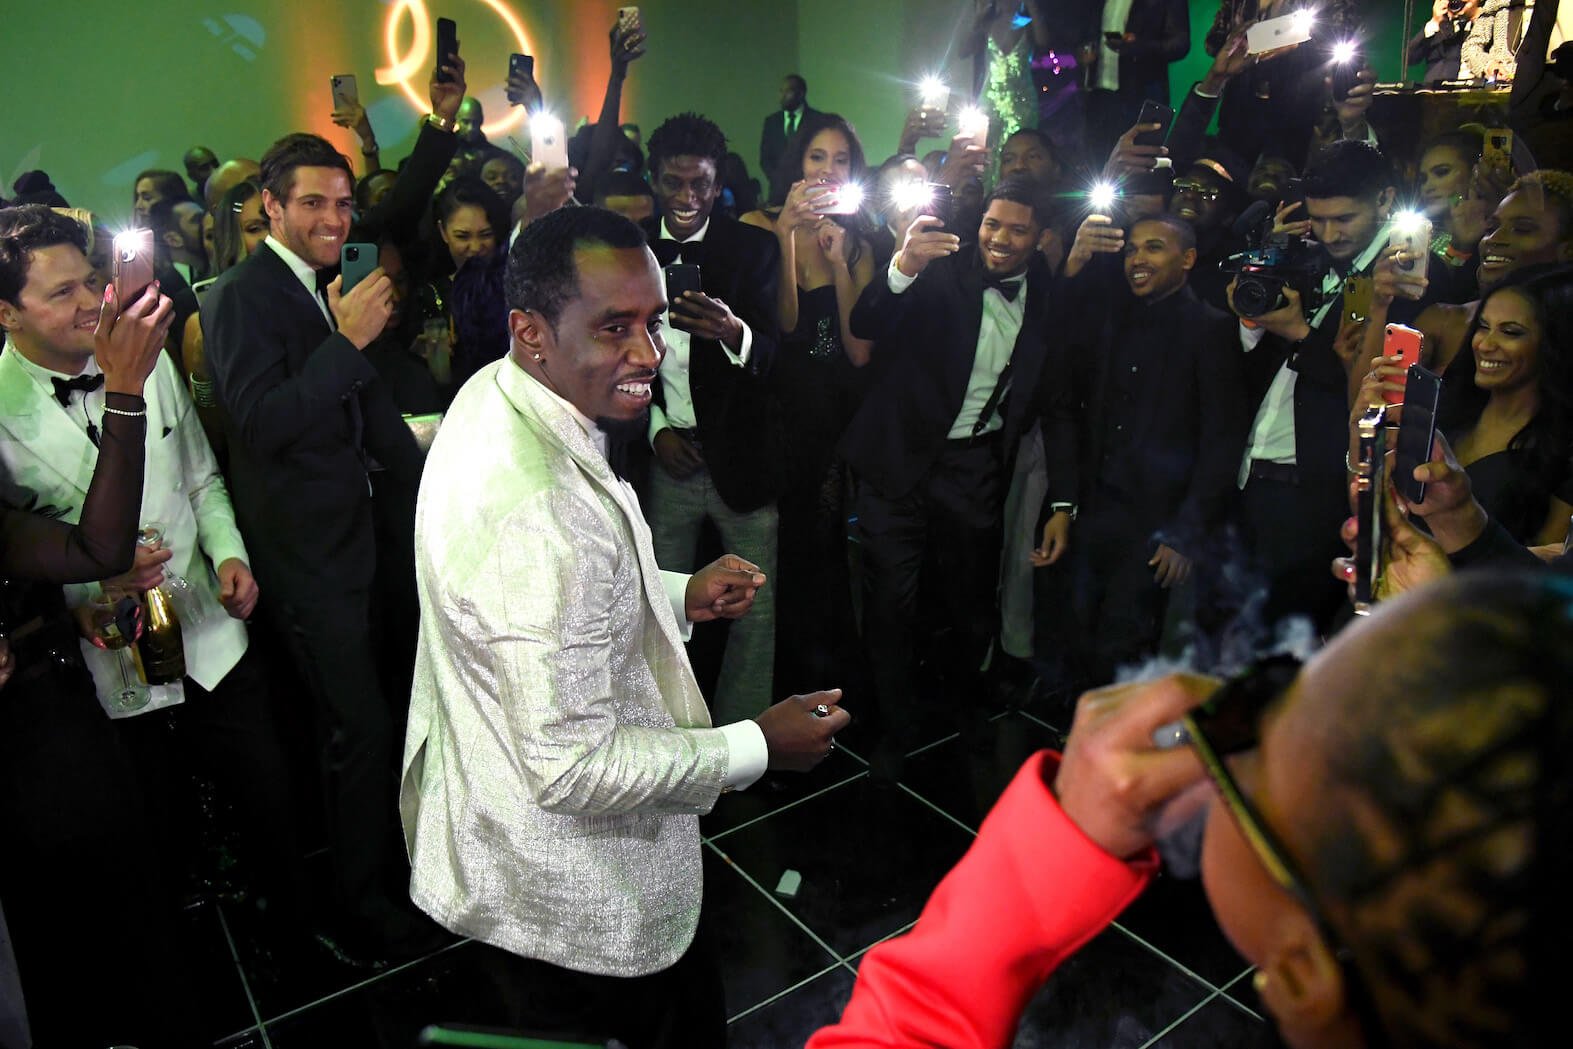 Sean 'P. Diddy' Combs dancing at his 50th birthday bash while surrounded by celebrities